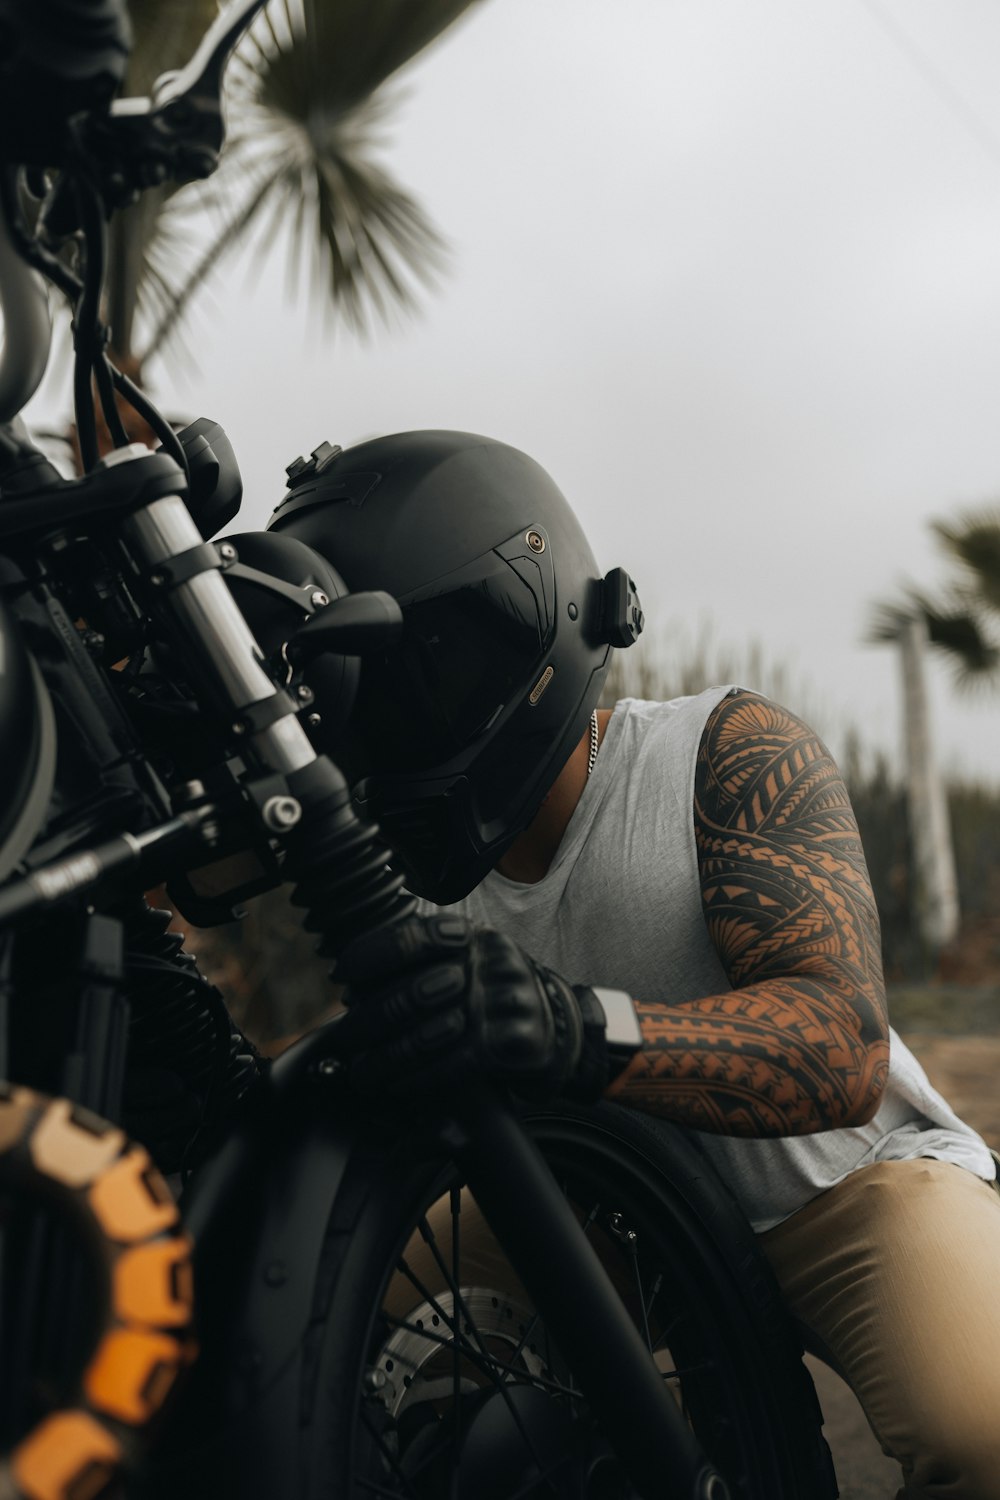 a person wearing a helmet and riding a motorcycle